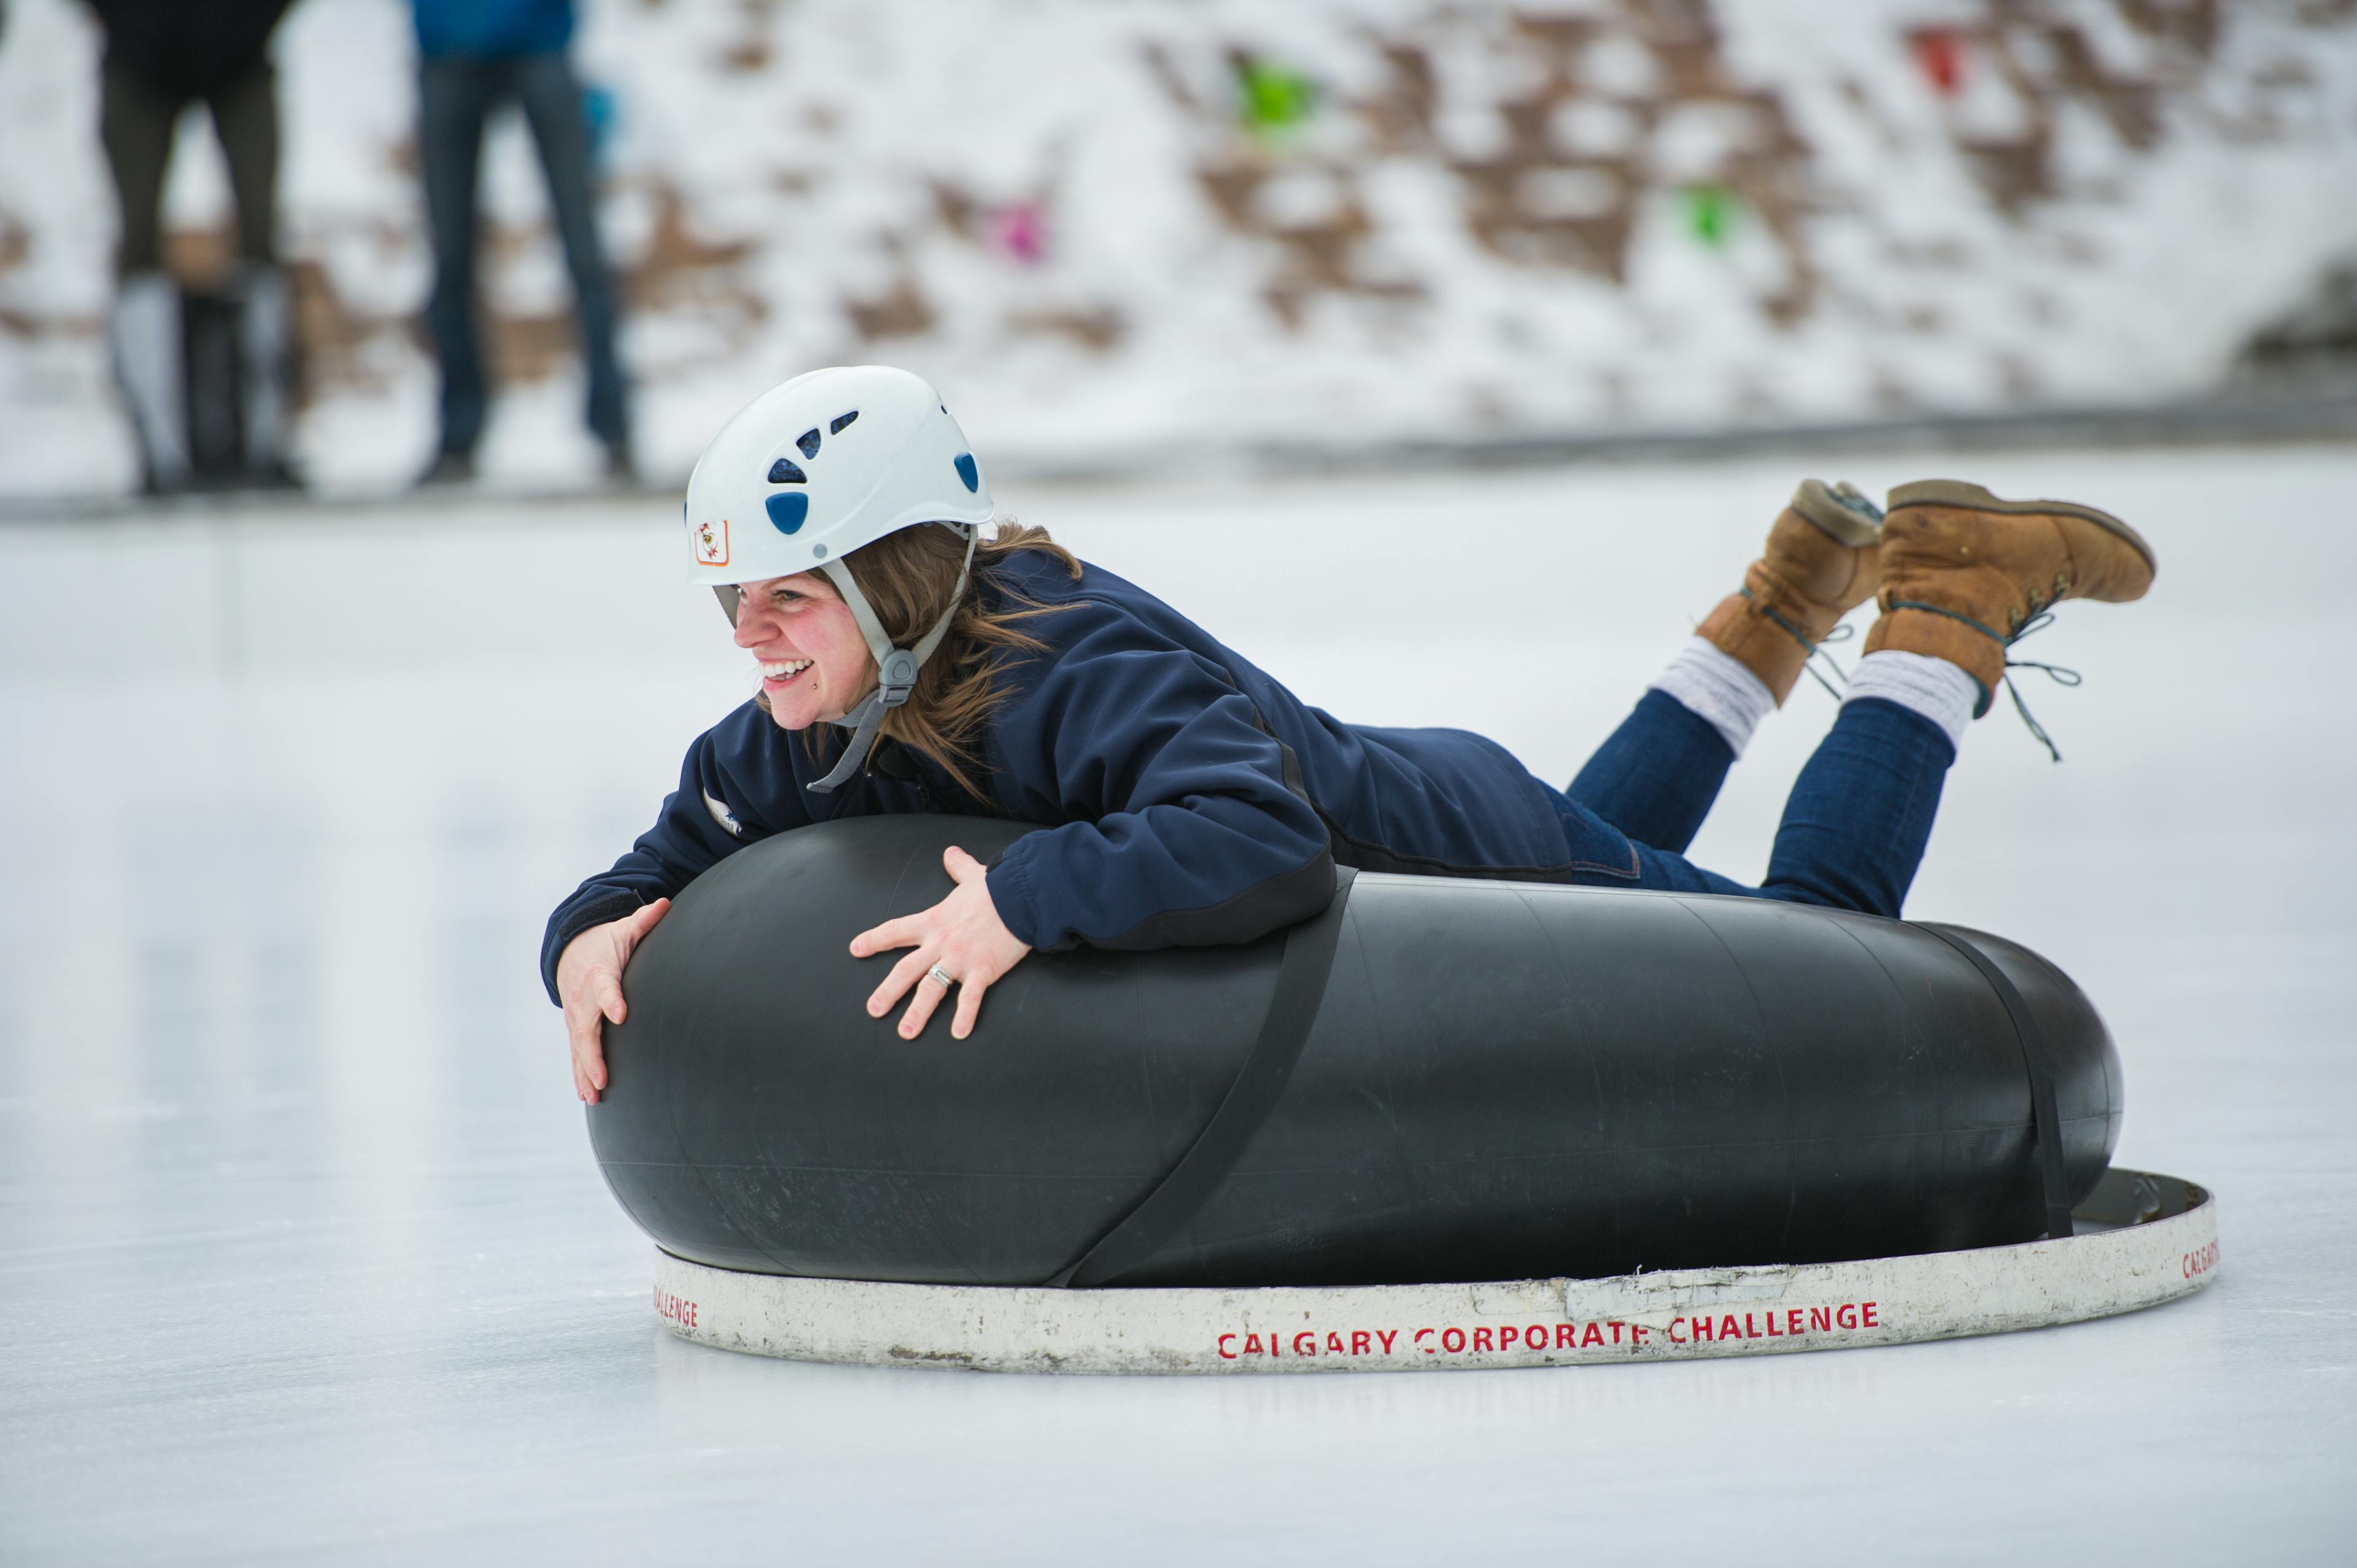 Woman sliding on a rubber tube on ice